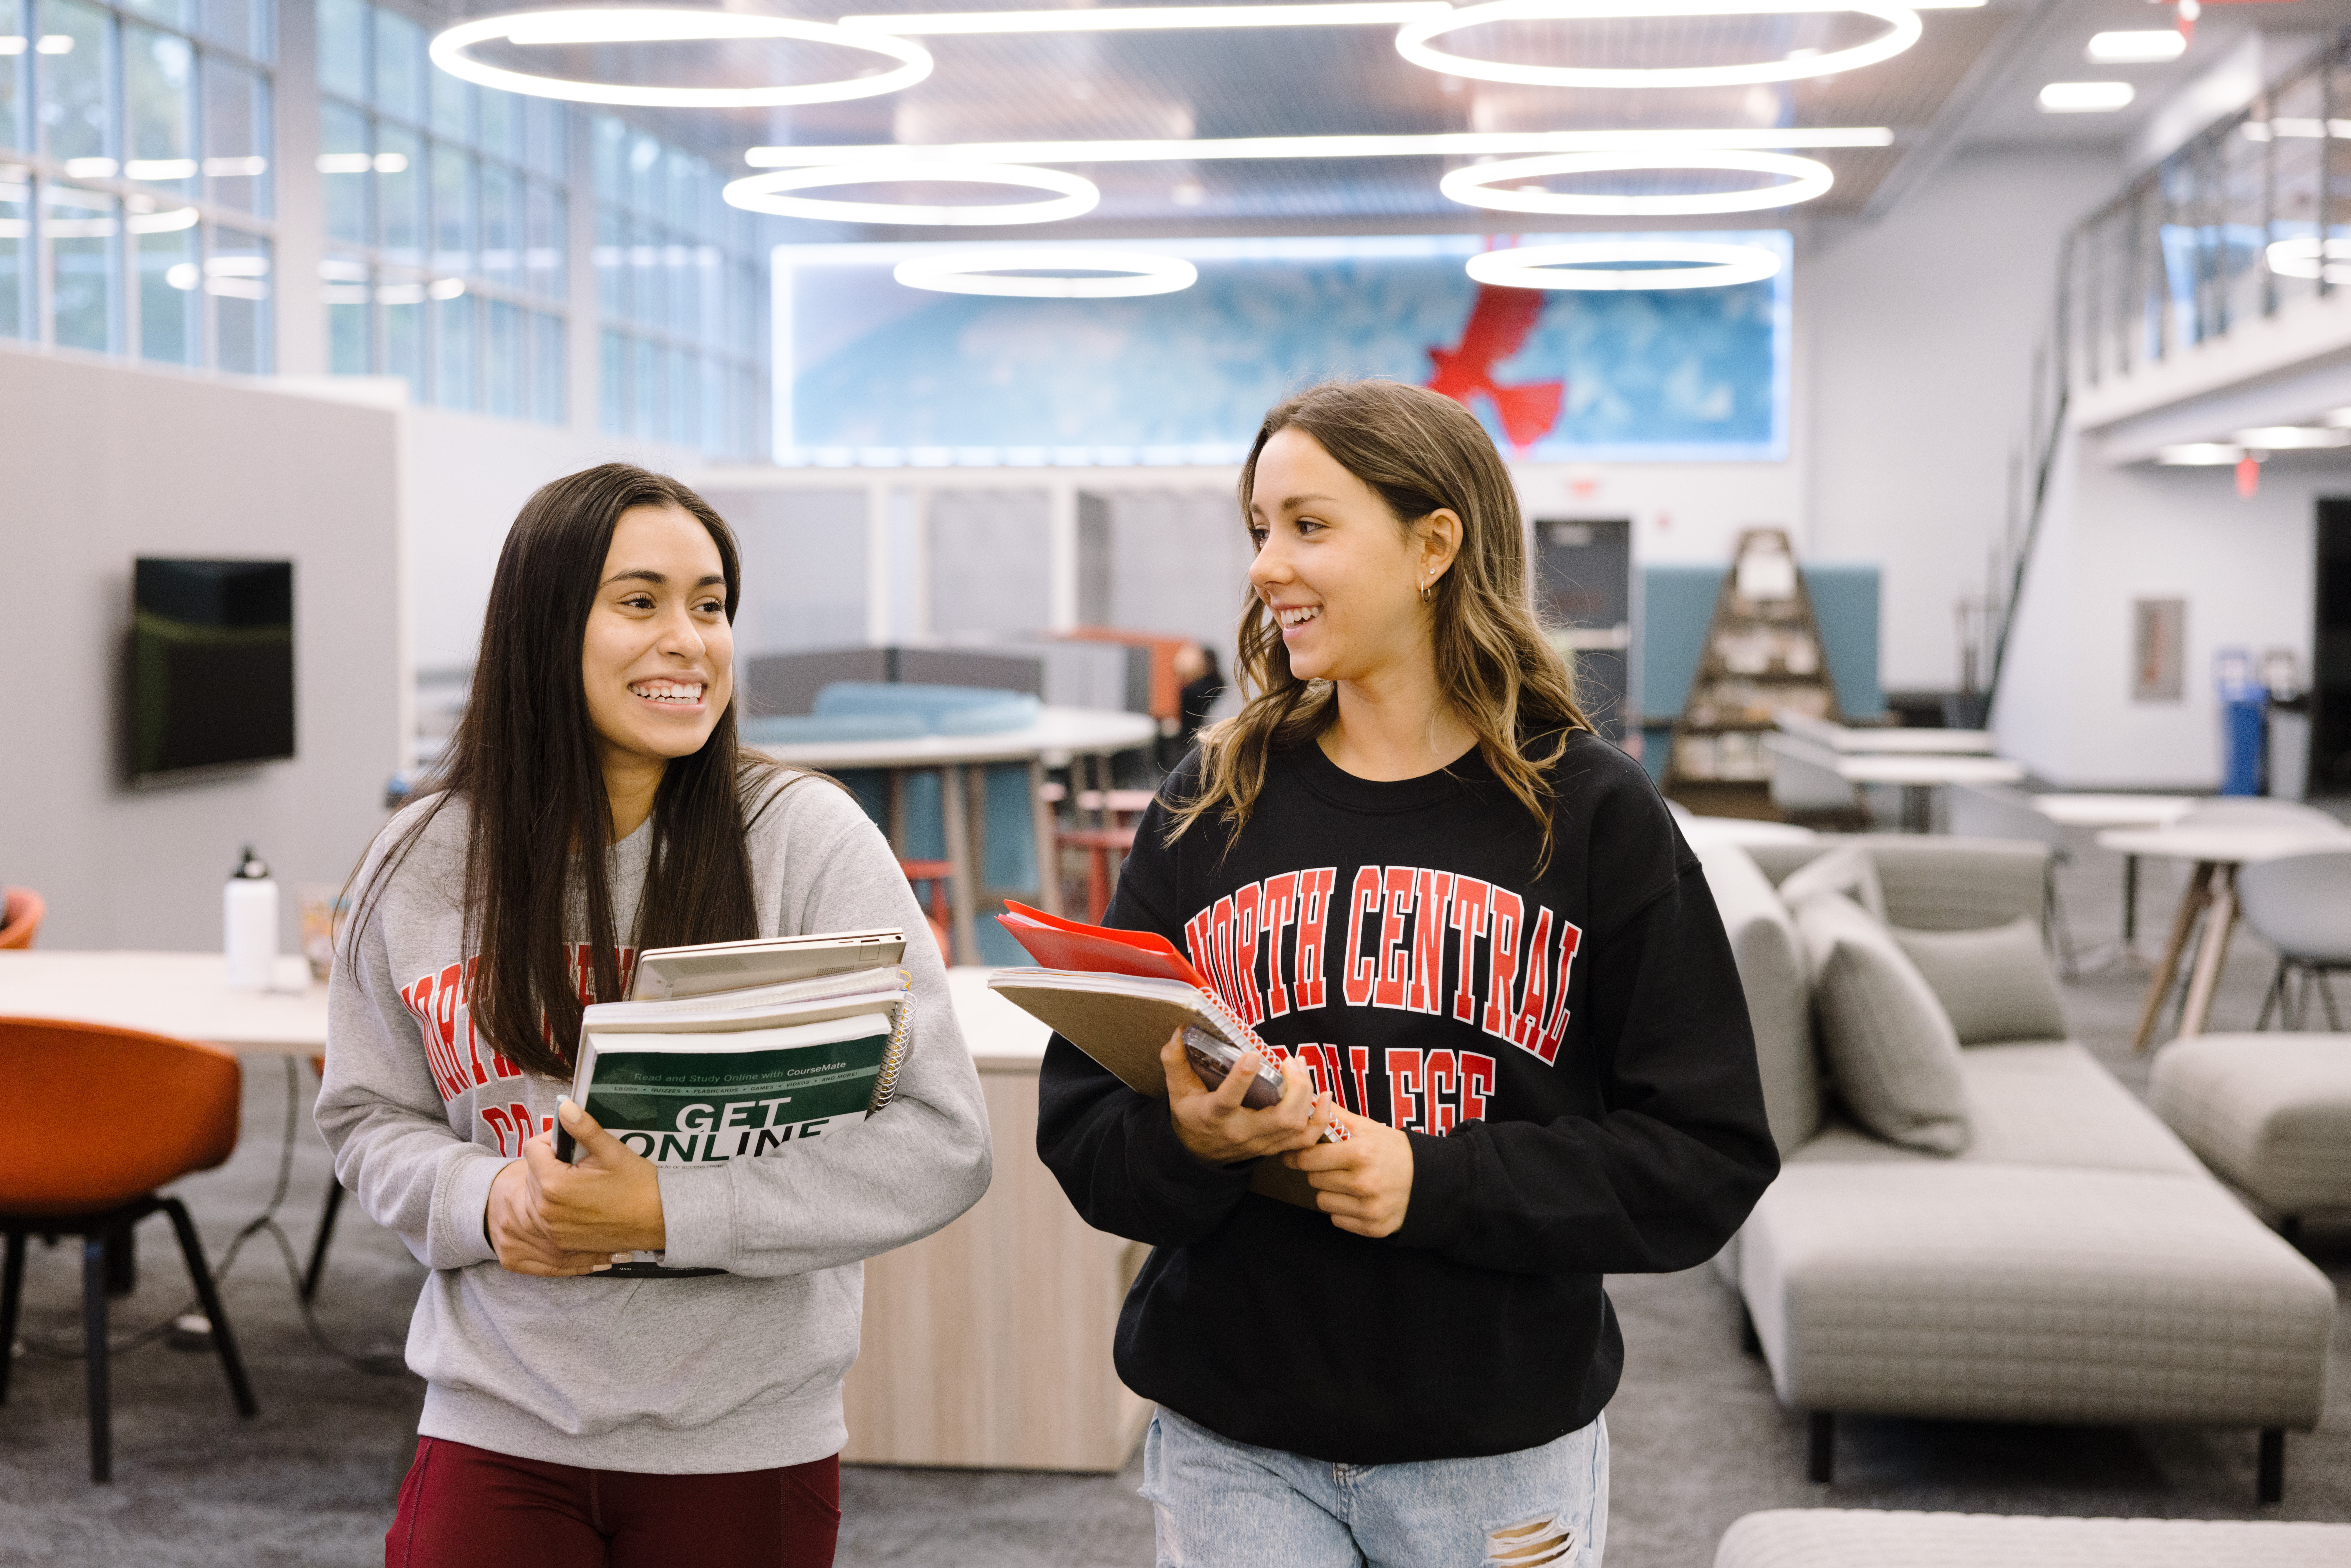 Students walking in the library